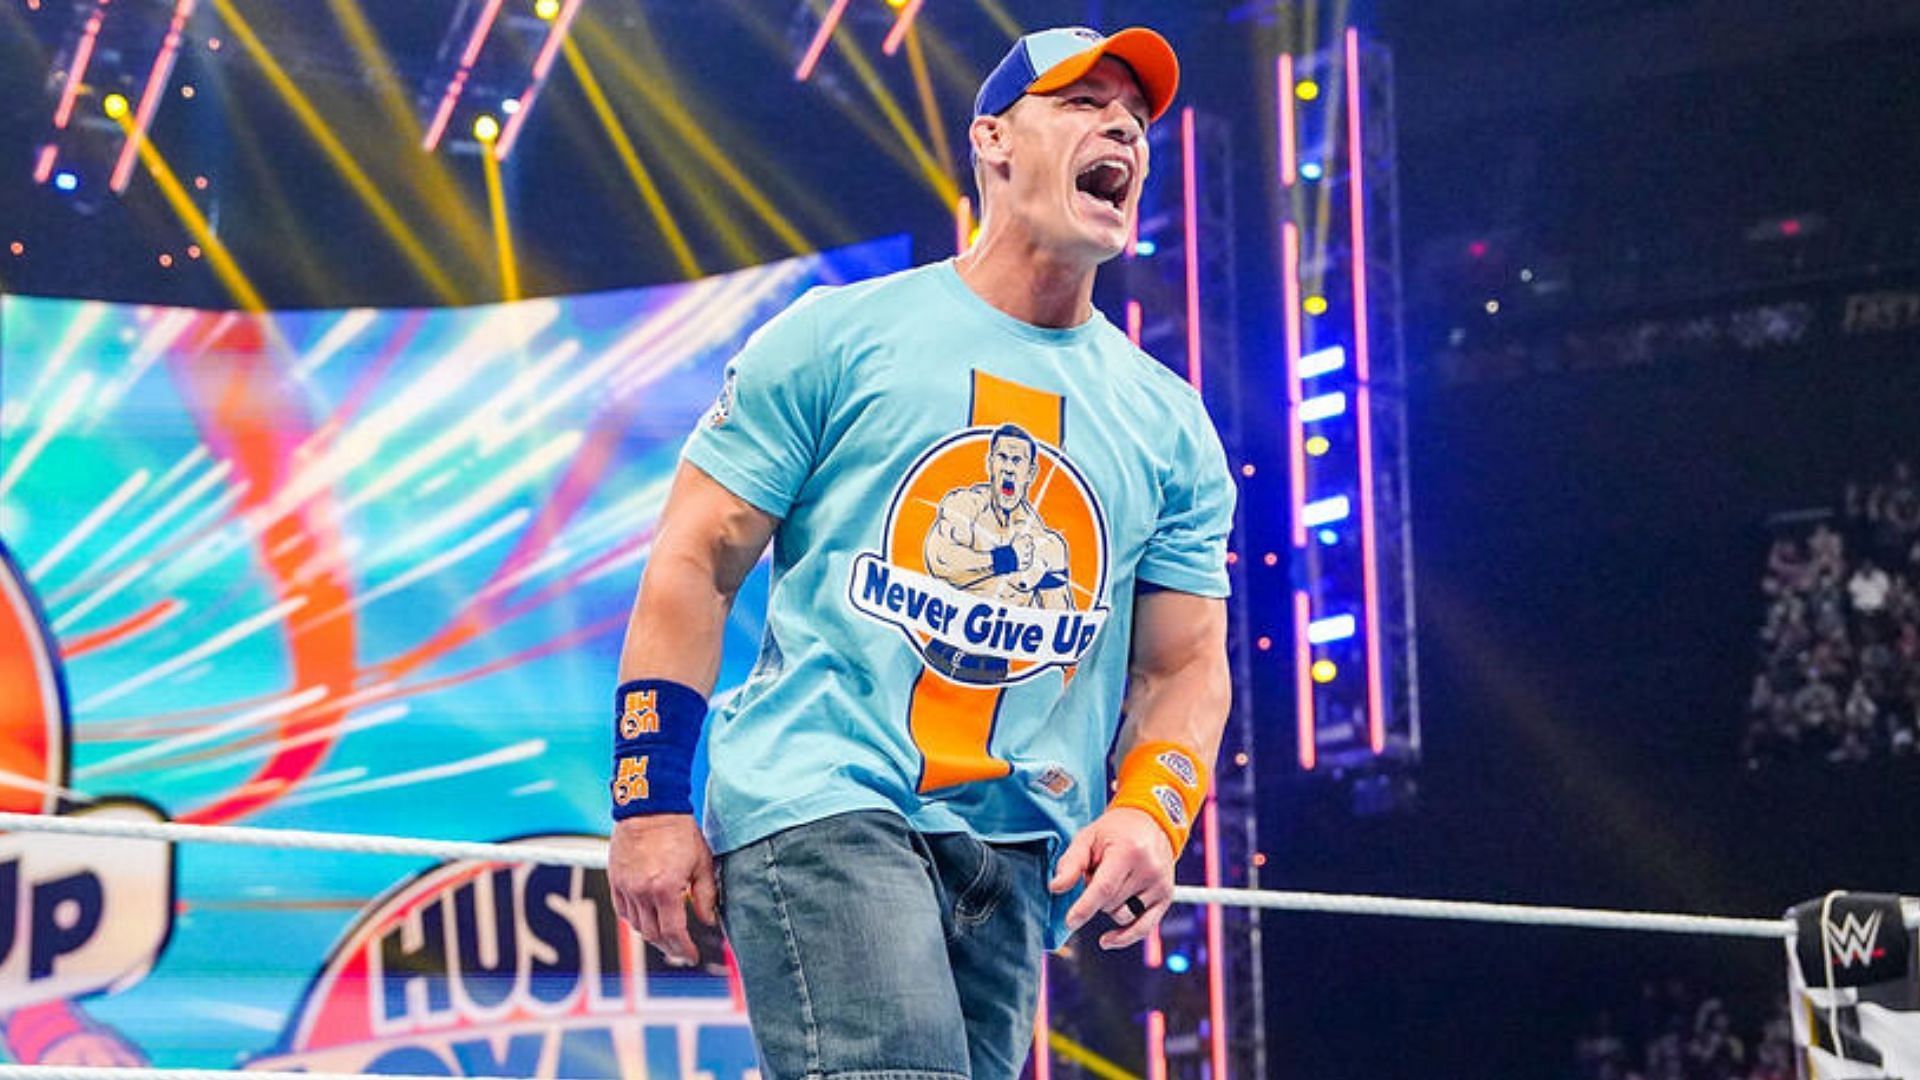 Cena appeared last night in the main event of WrestleMania XL.